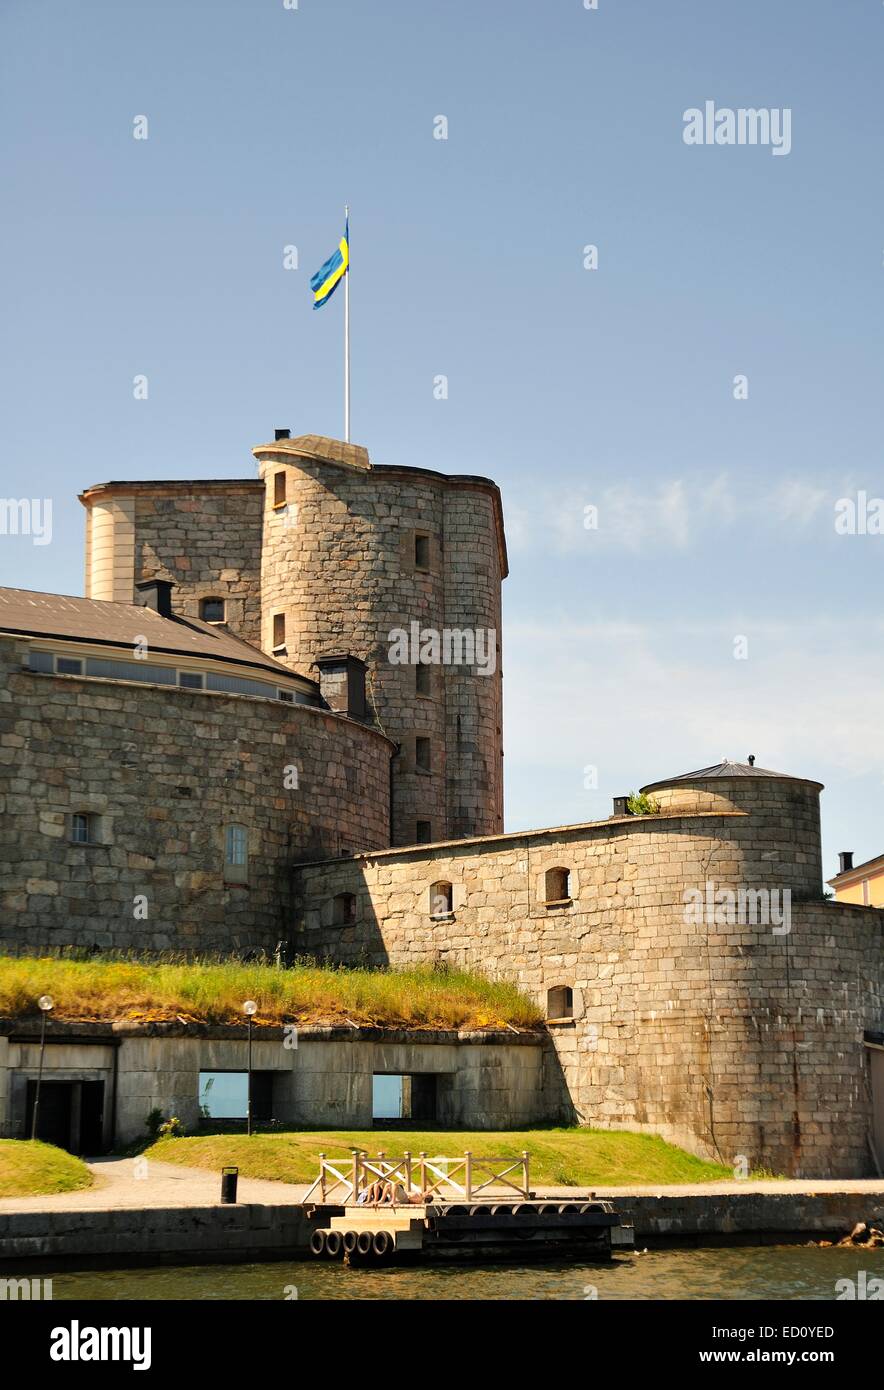 Vaxholm Fortress - Sweden Stock Photo